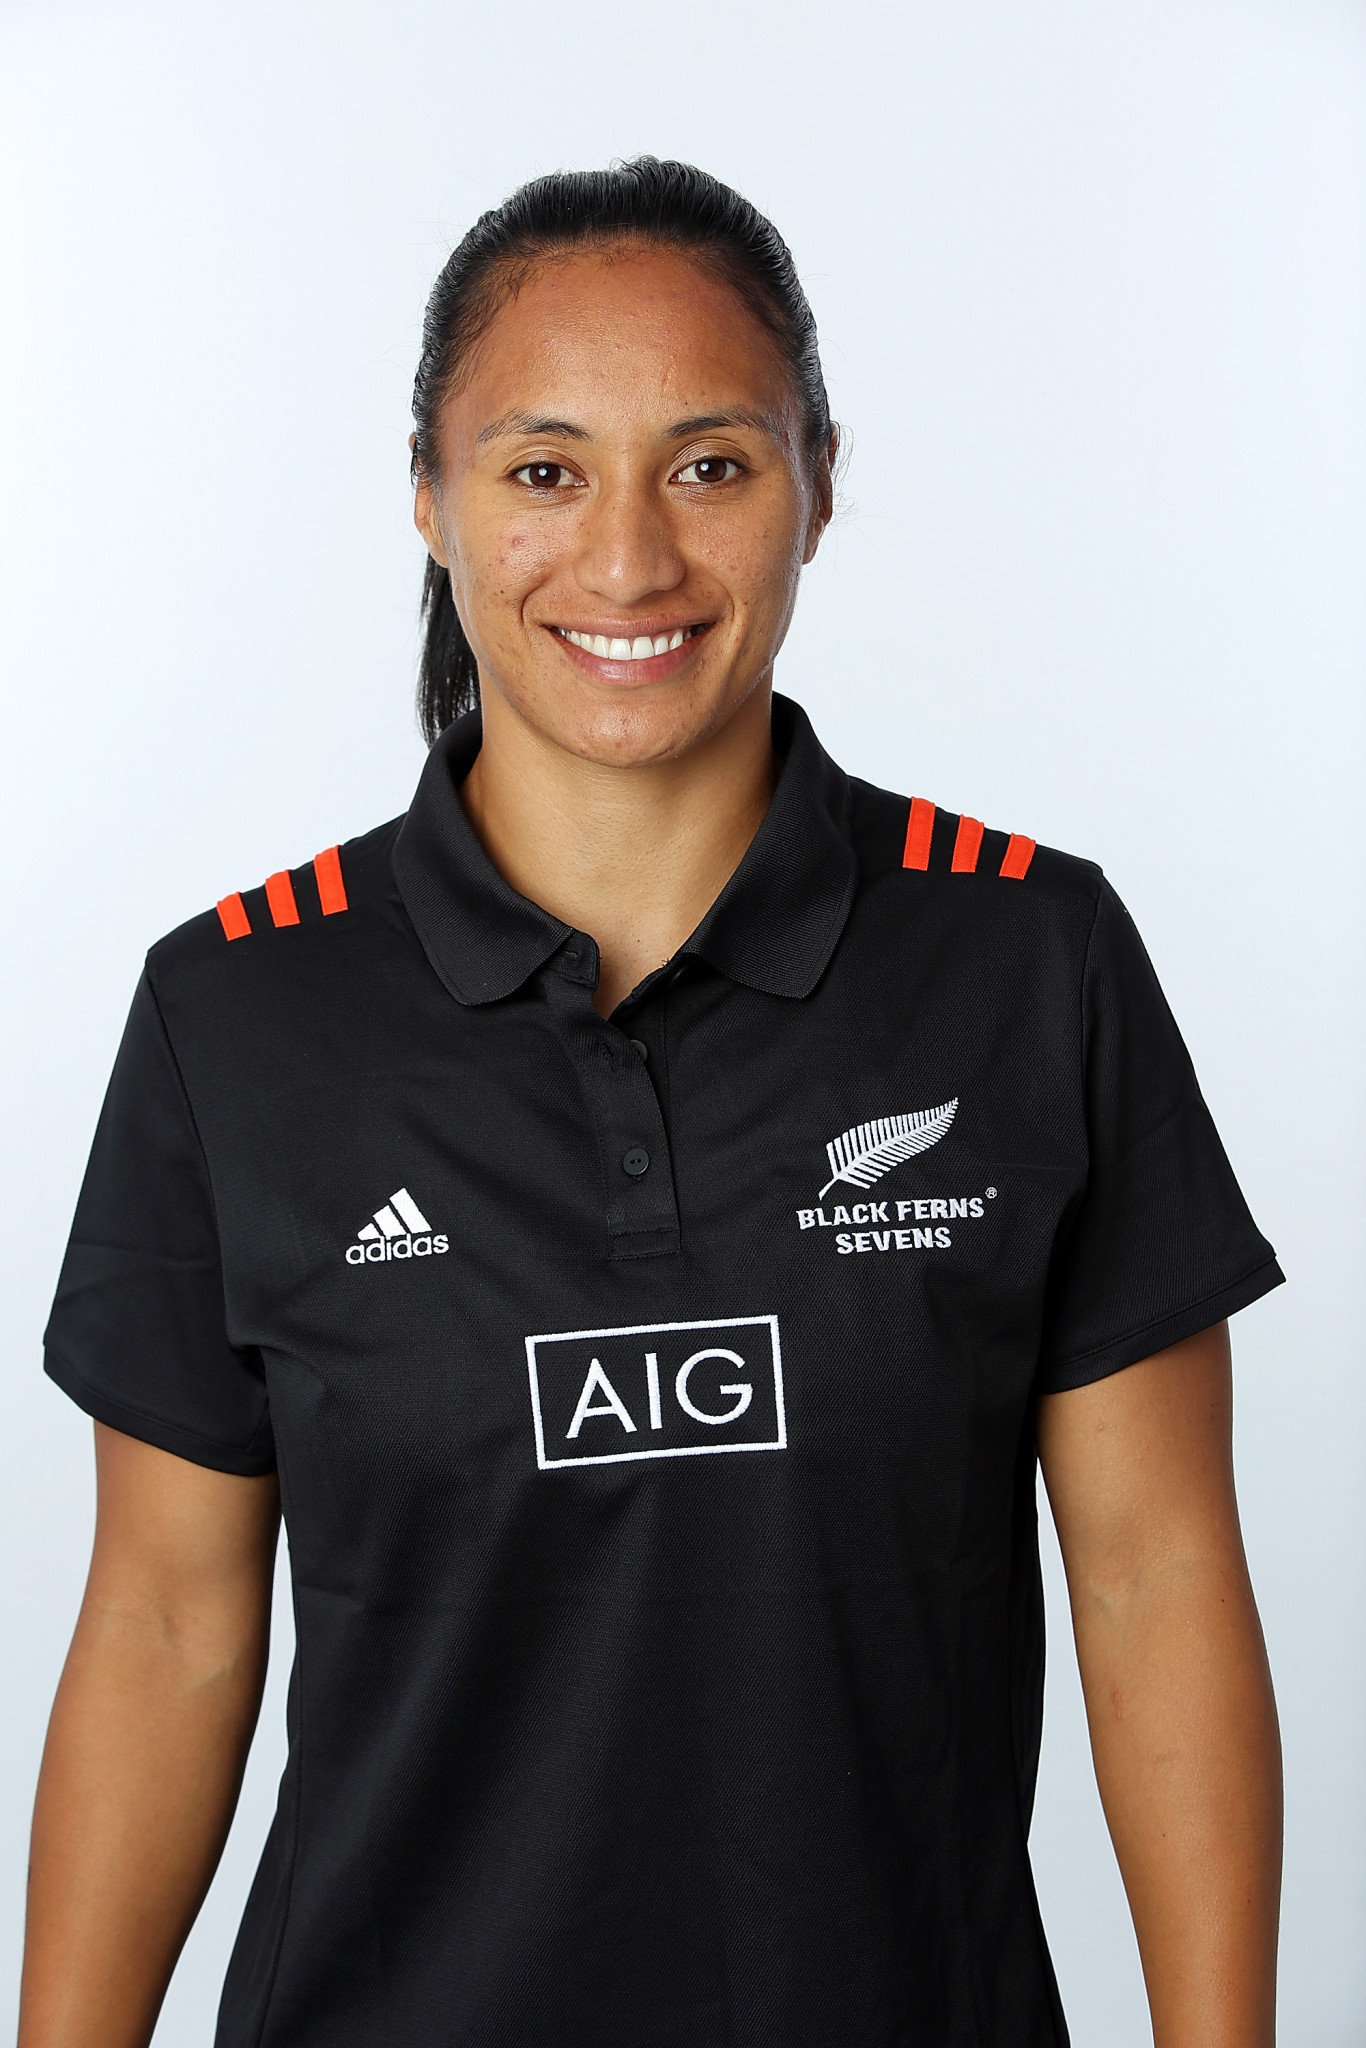 Kat Whata-Simpkins has been ruled out of New Zealand's women’s rugby sevens team with a leg injury ©Getty Images